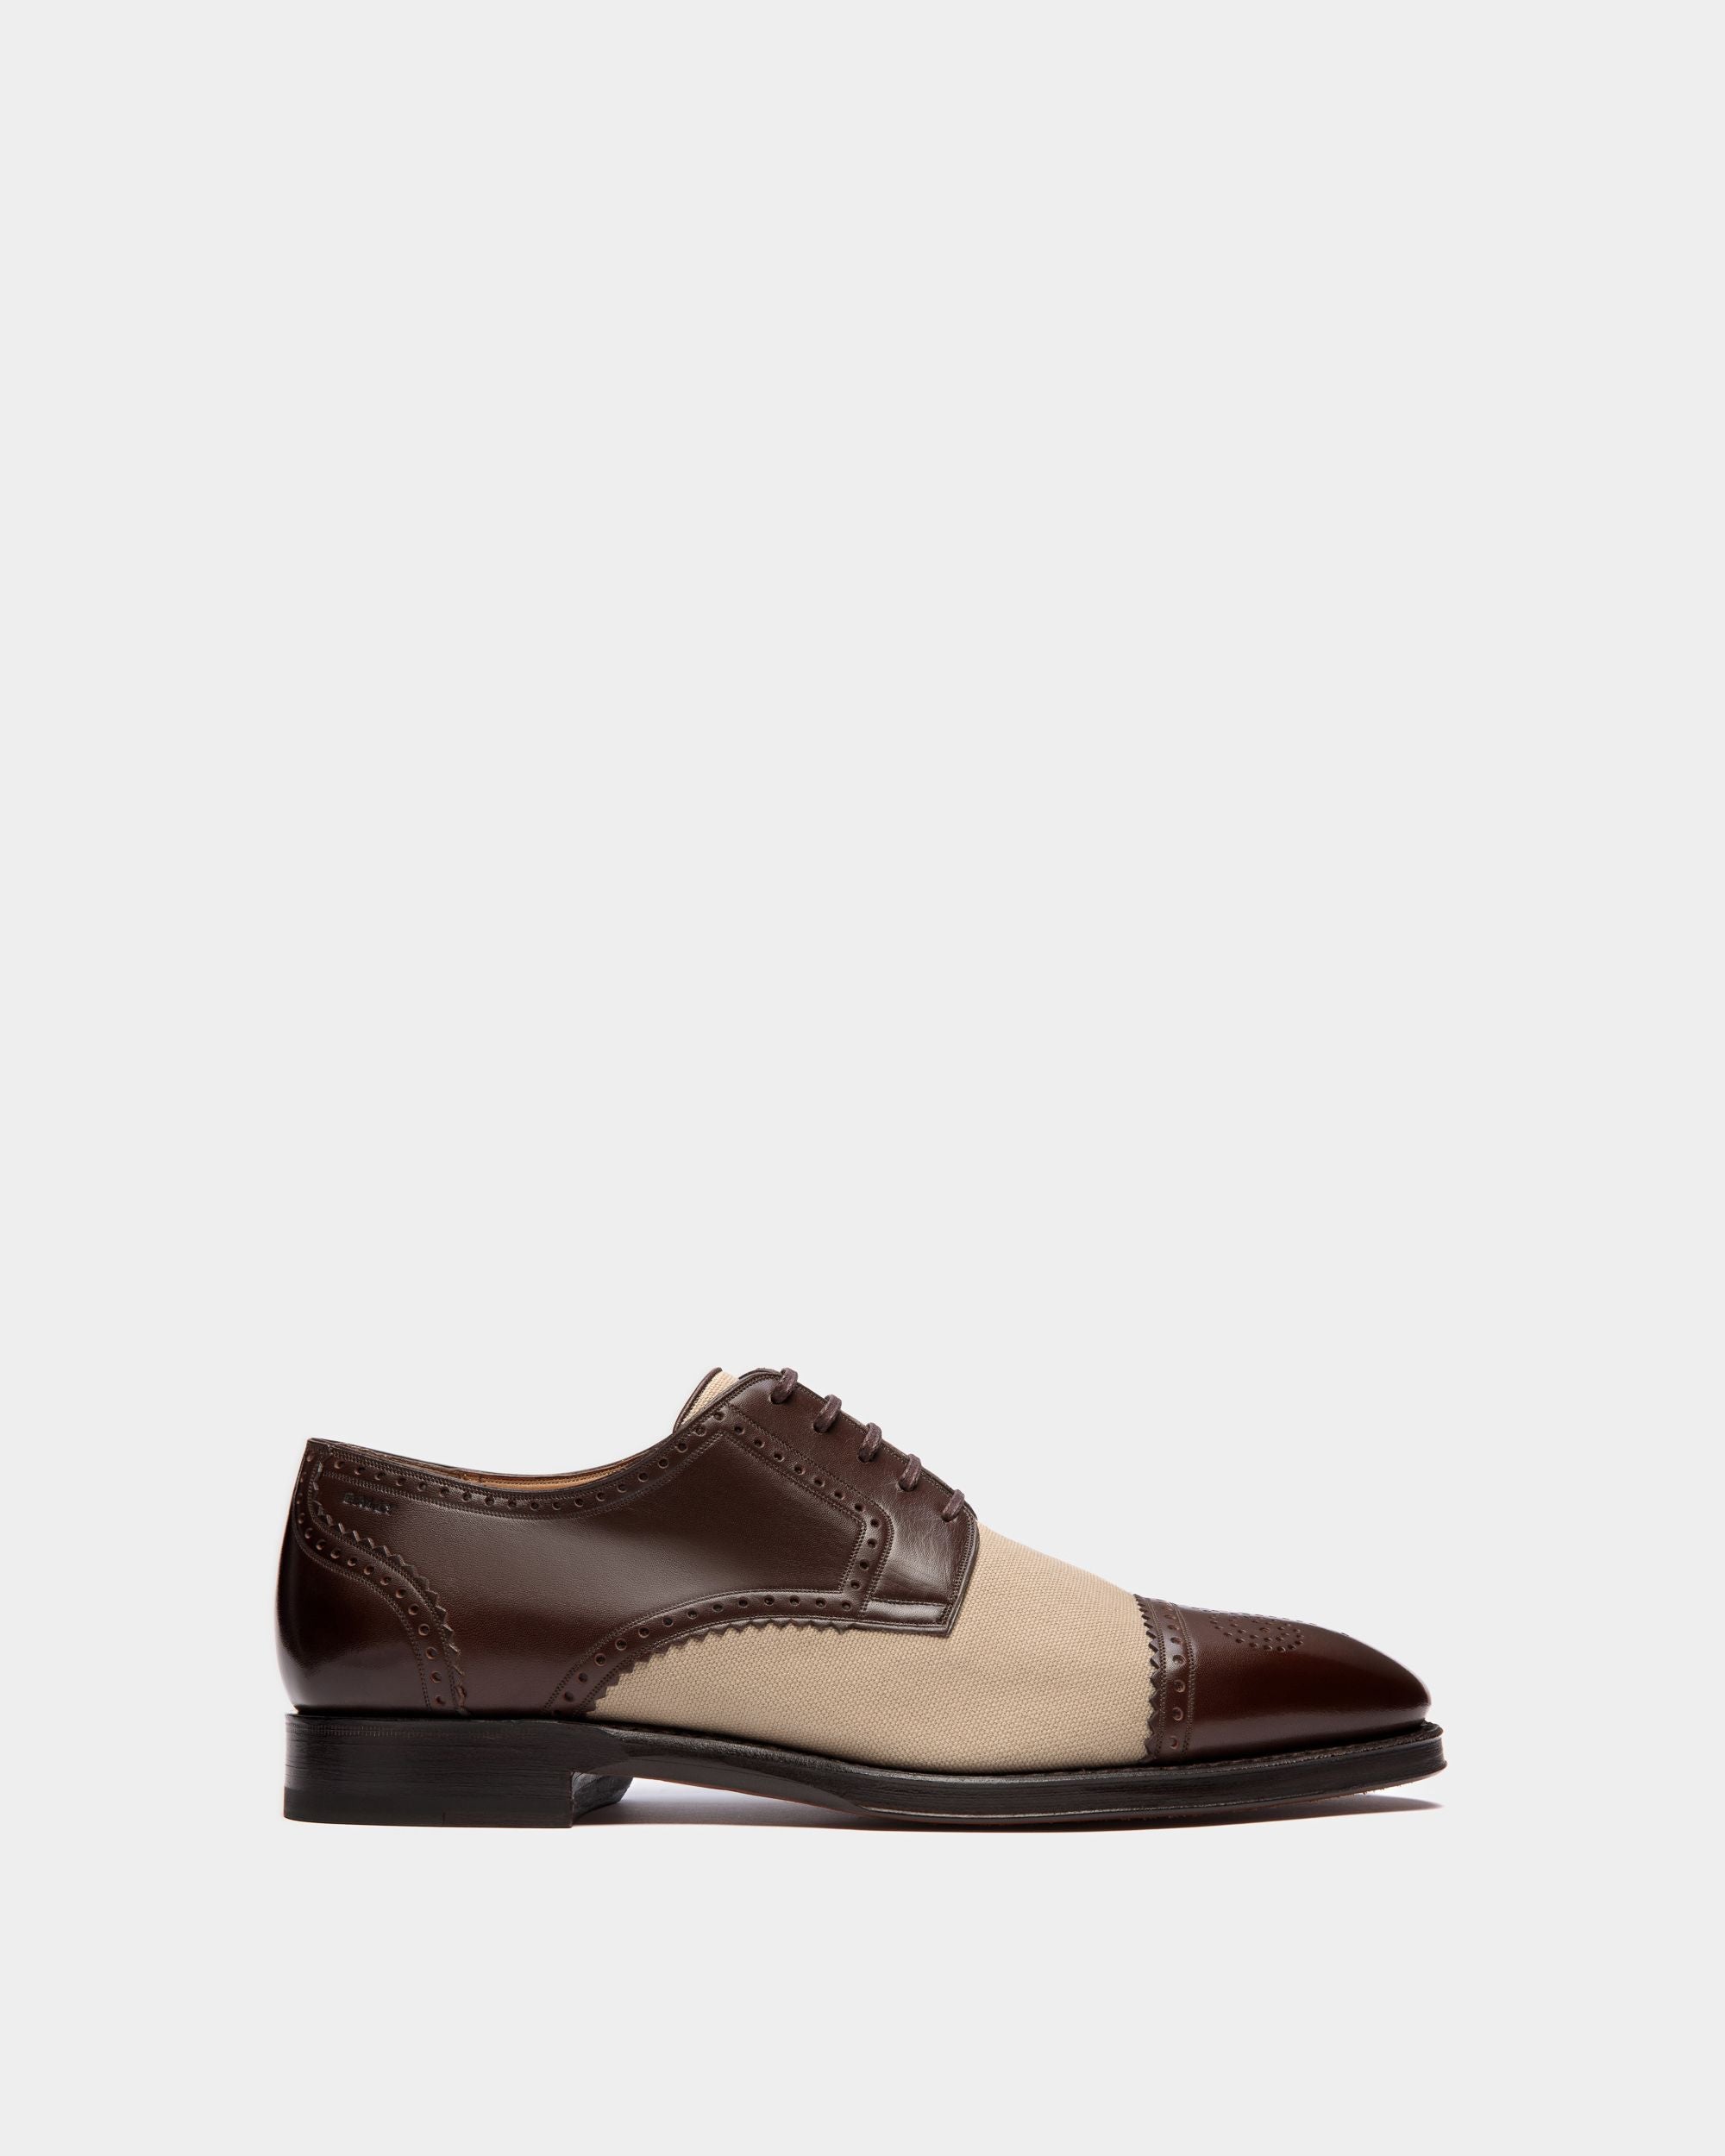 Scribe | Men's Derby in Two-tone Leather and Fabric | Bally | Still Life Side